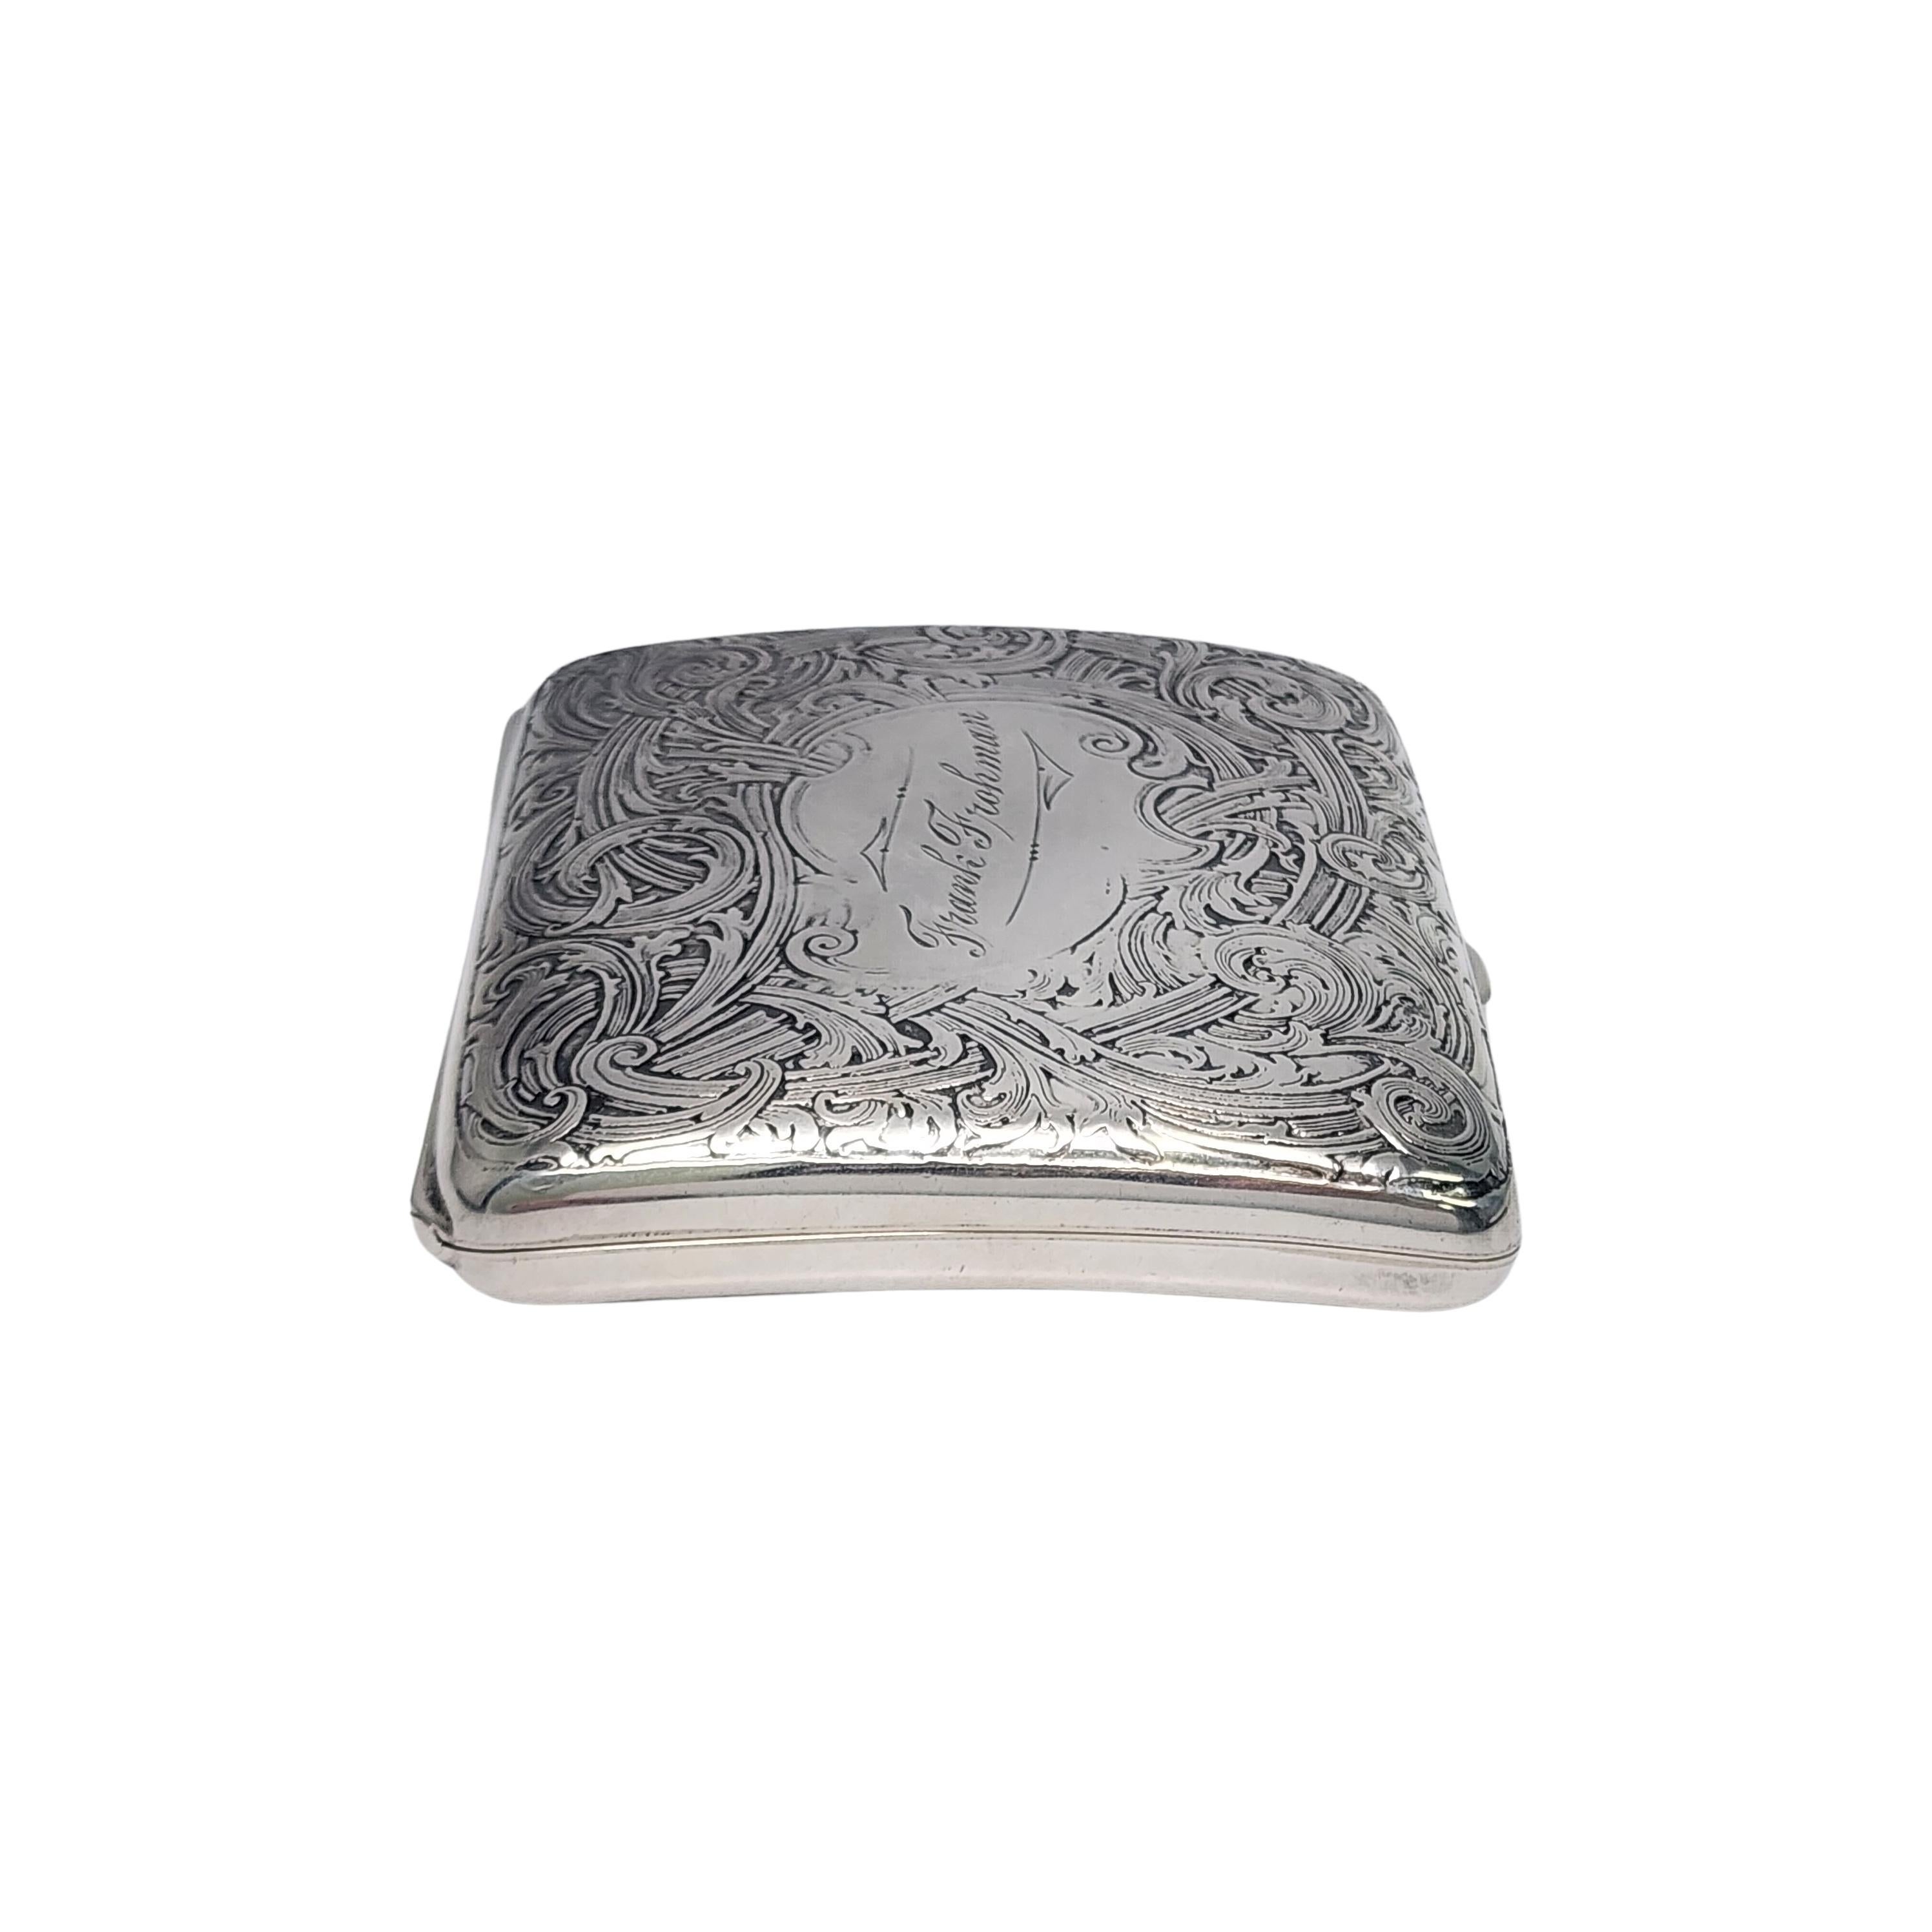 how much is a silver cigarette case worth